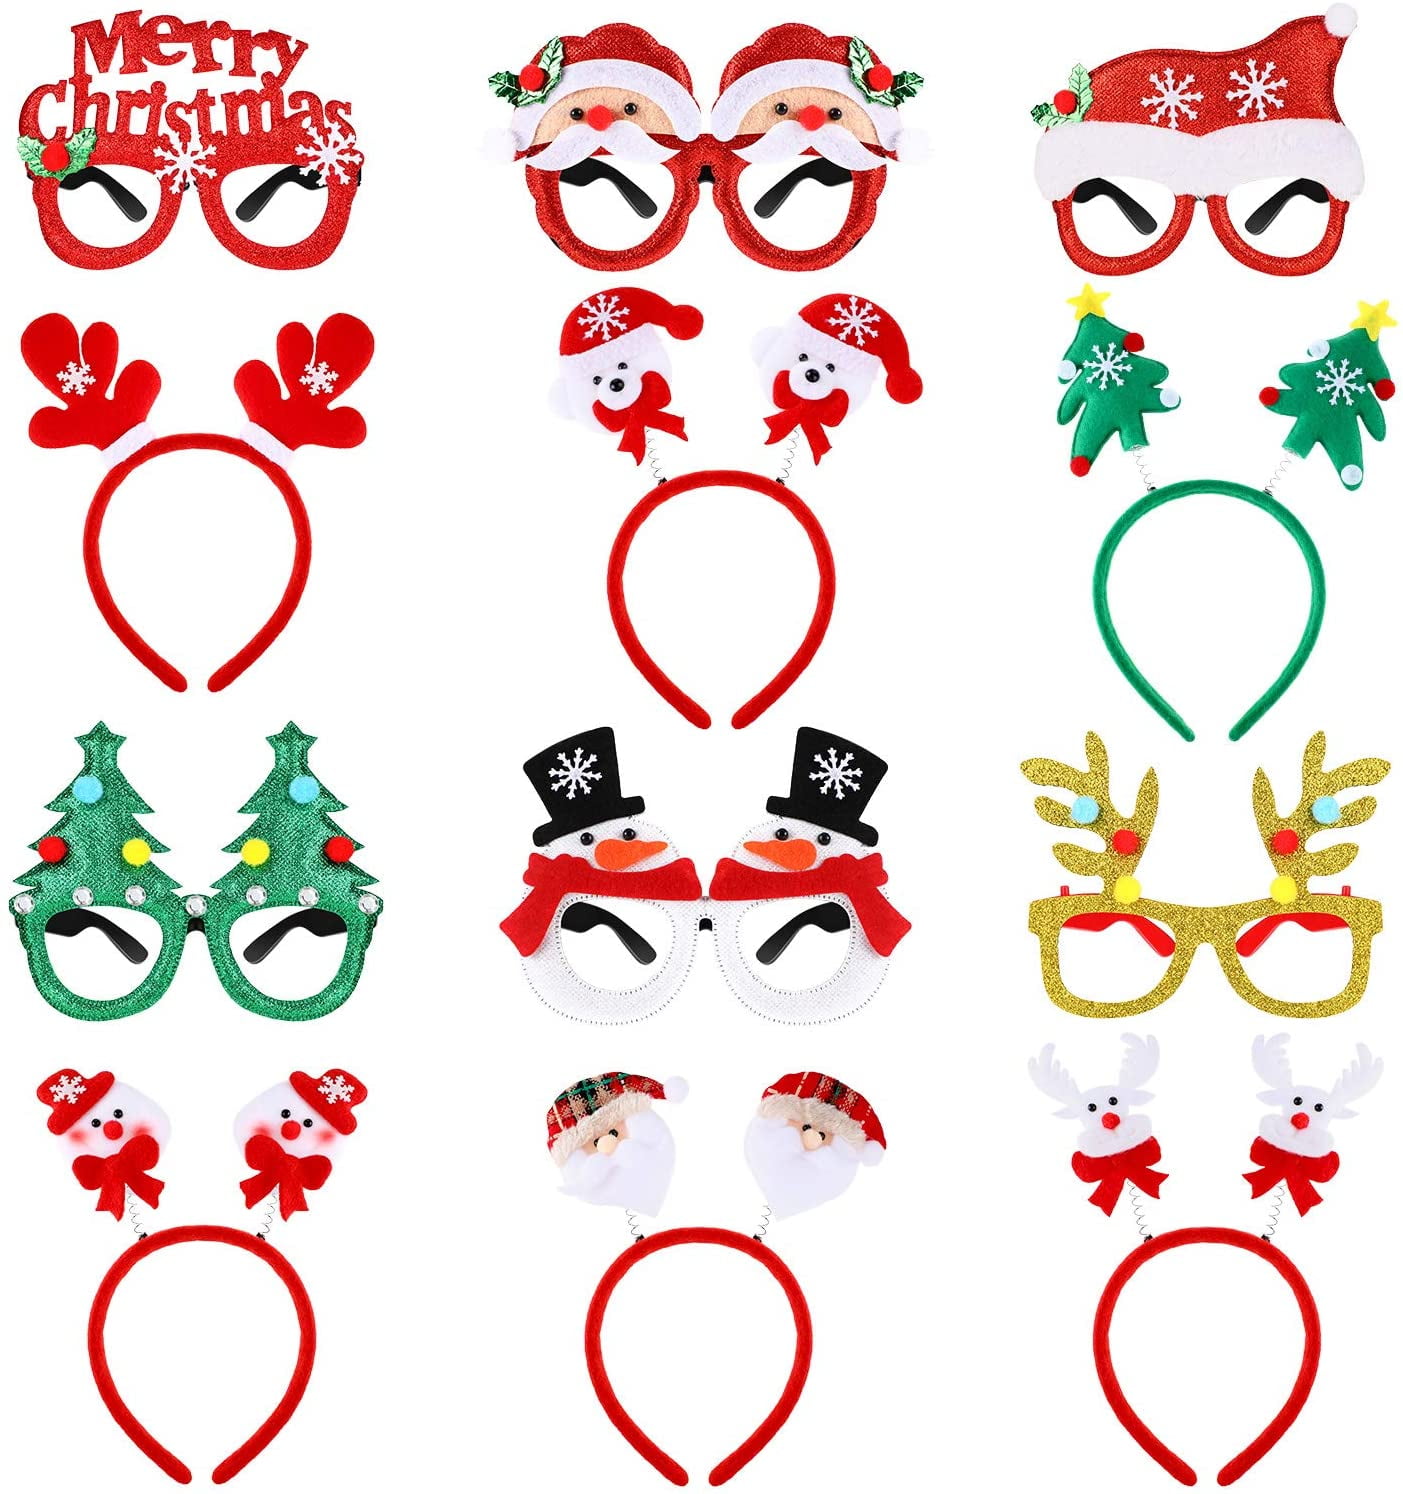 NEW Adults Christmas Novelty Glasses Xmas Party Costume Photo Booth Props Santa